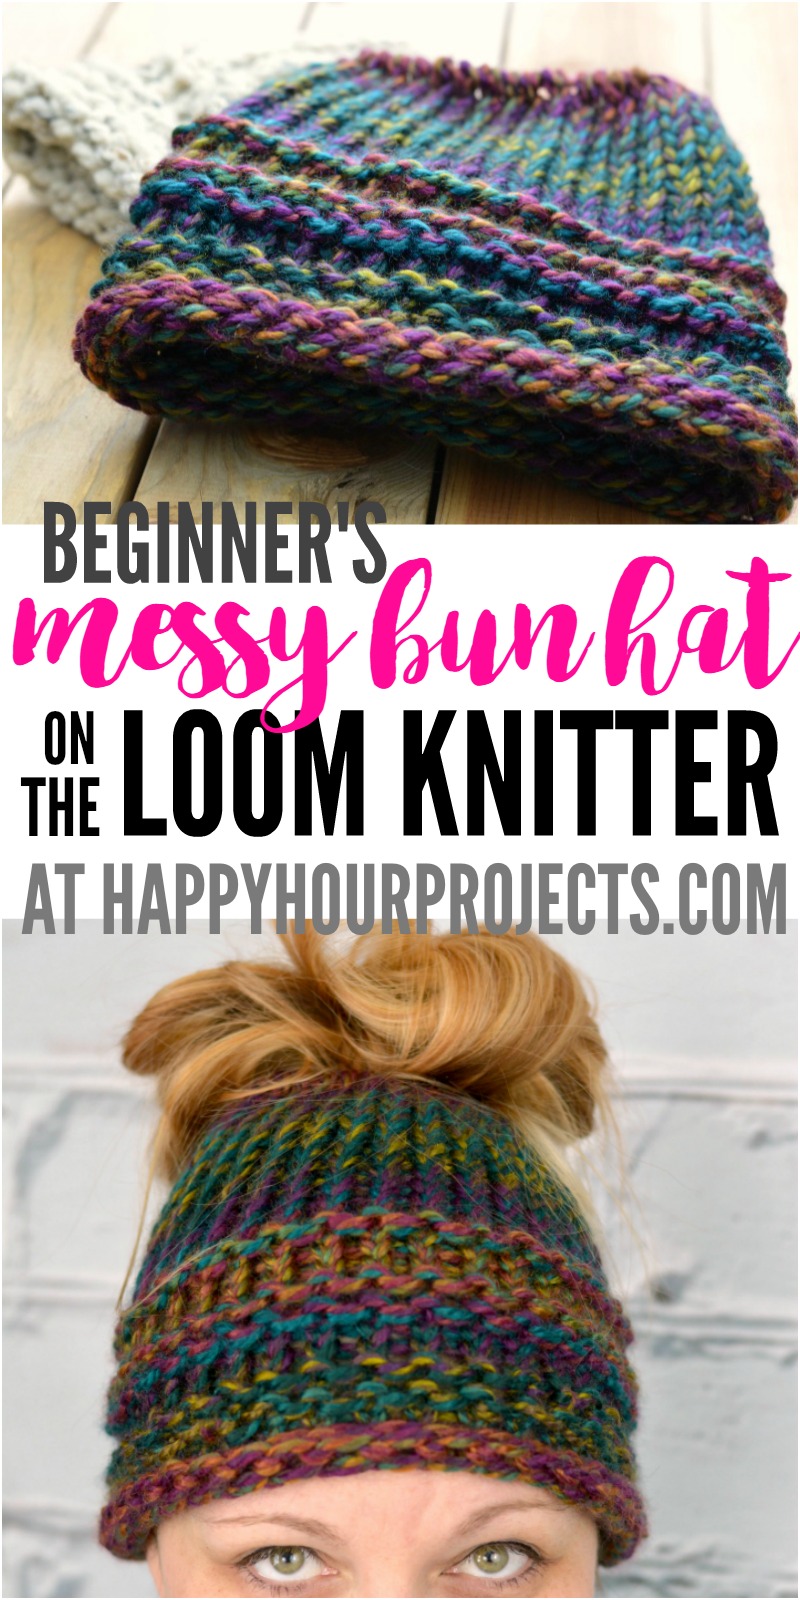 loom knitting patterns beginners messy bun hat using the loom knitter at happyhourprojects.com |  2-hour alfpjcd